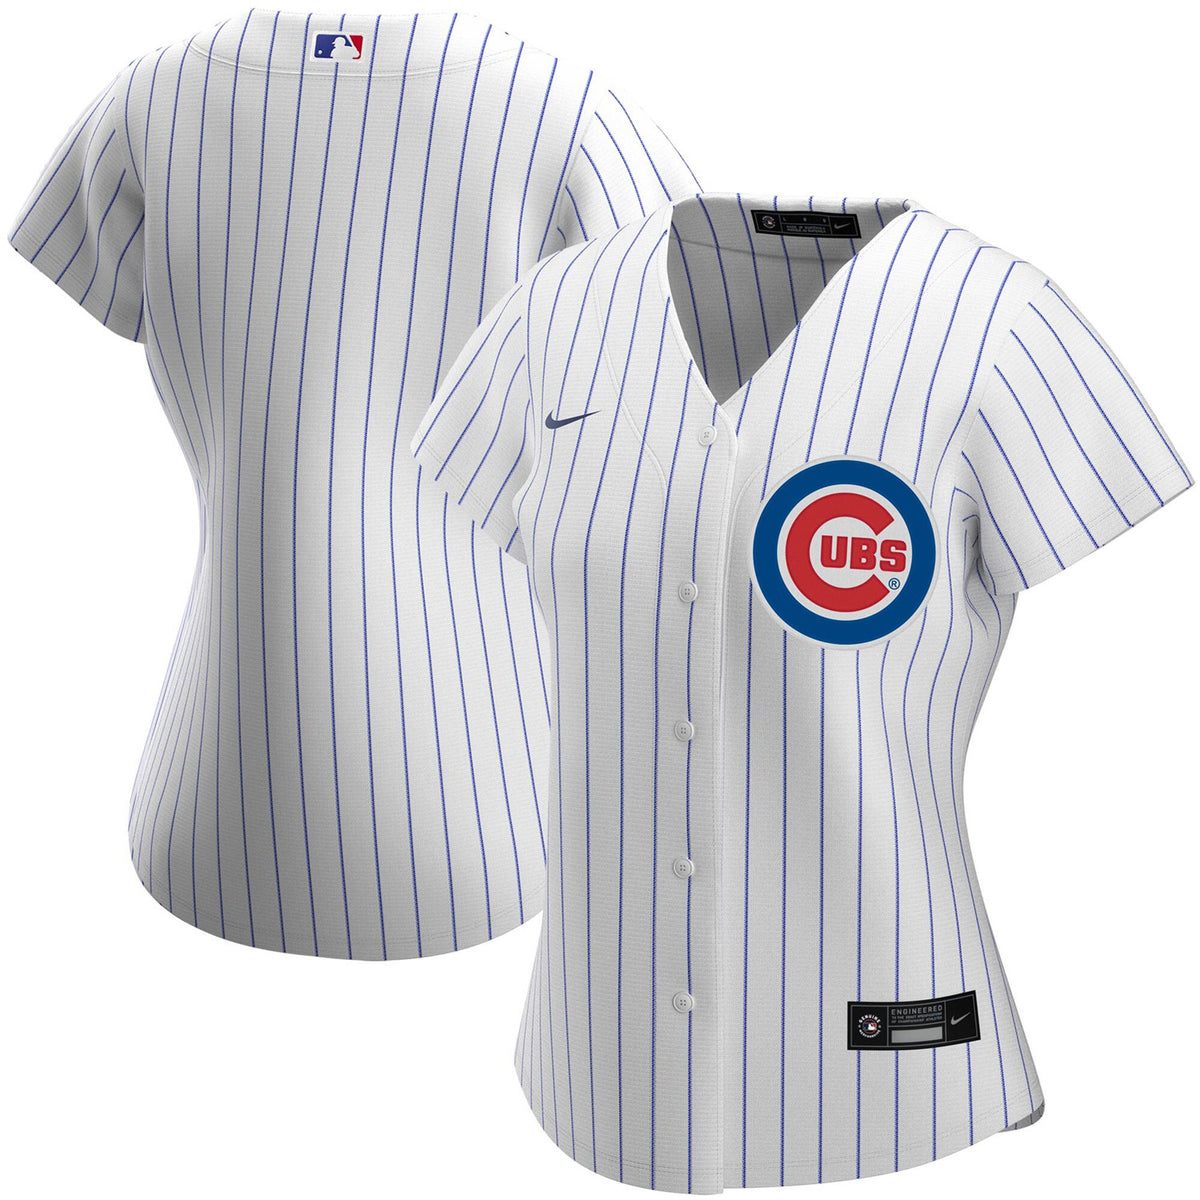 Chicago Cubs fan jersey